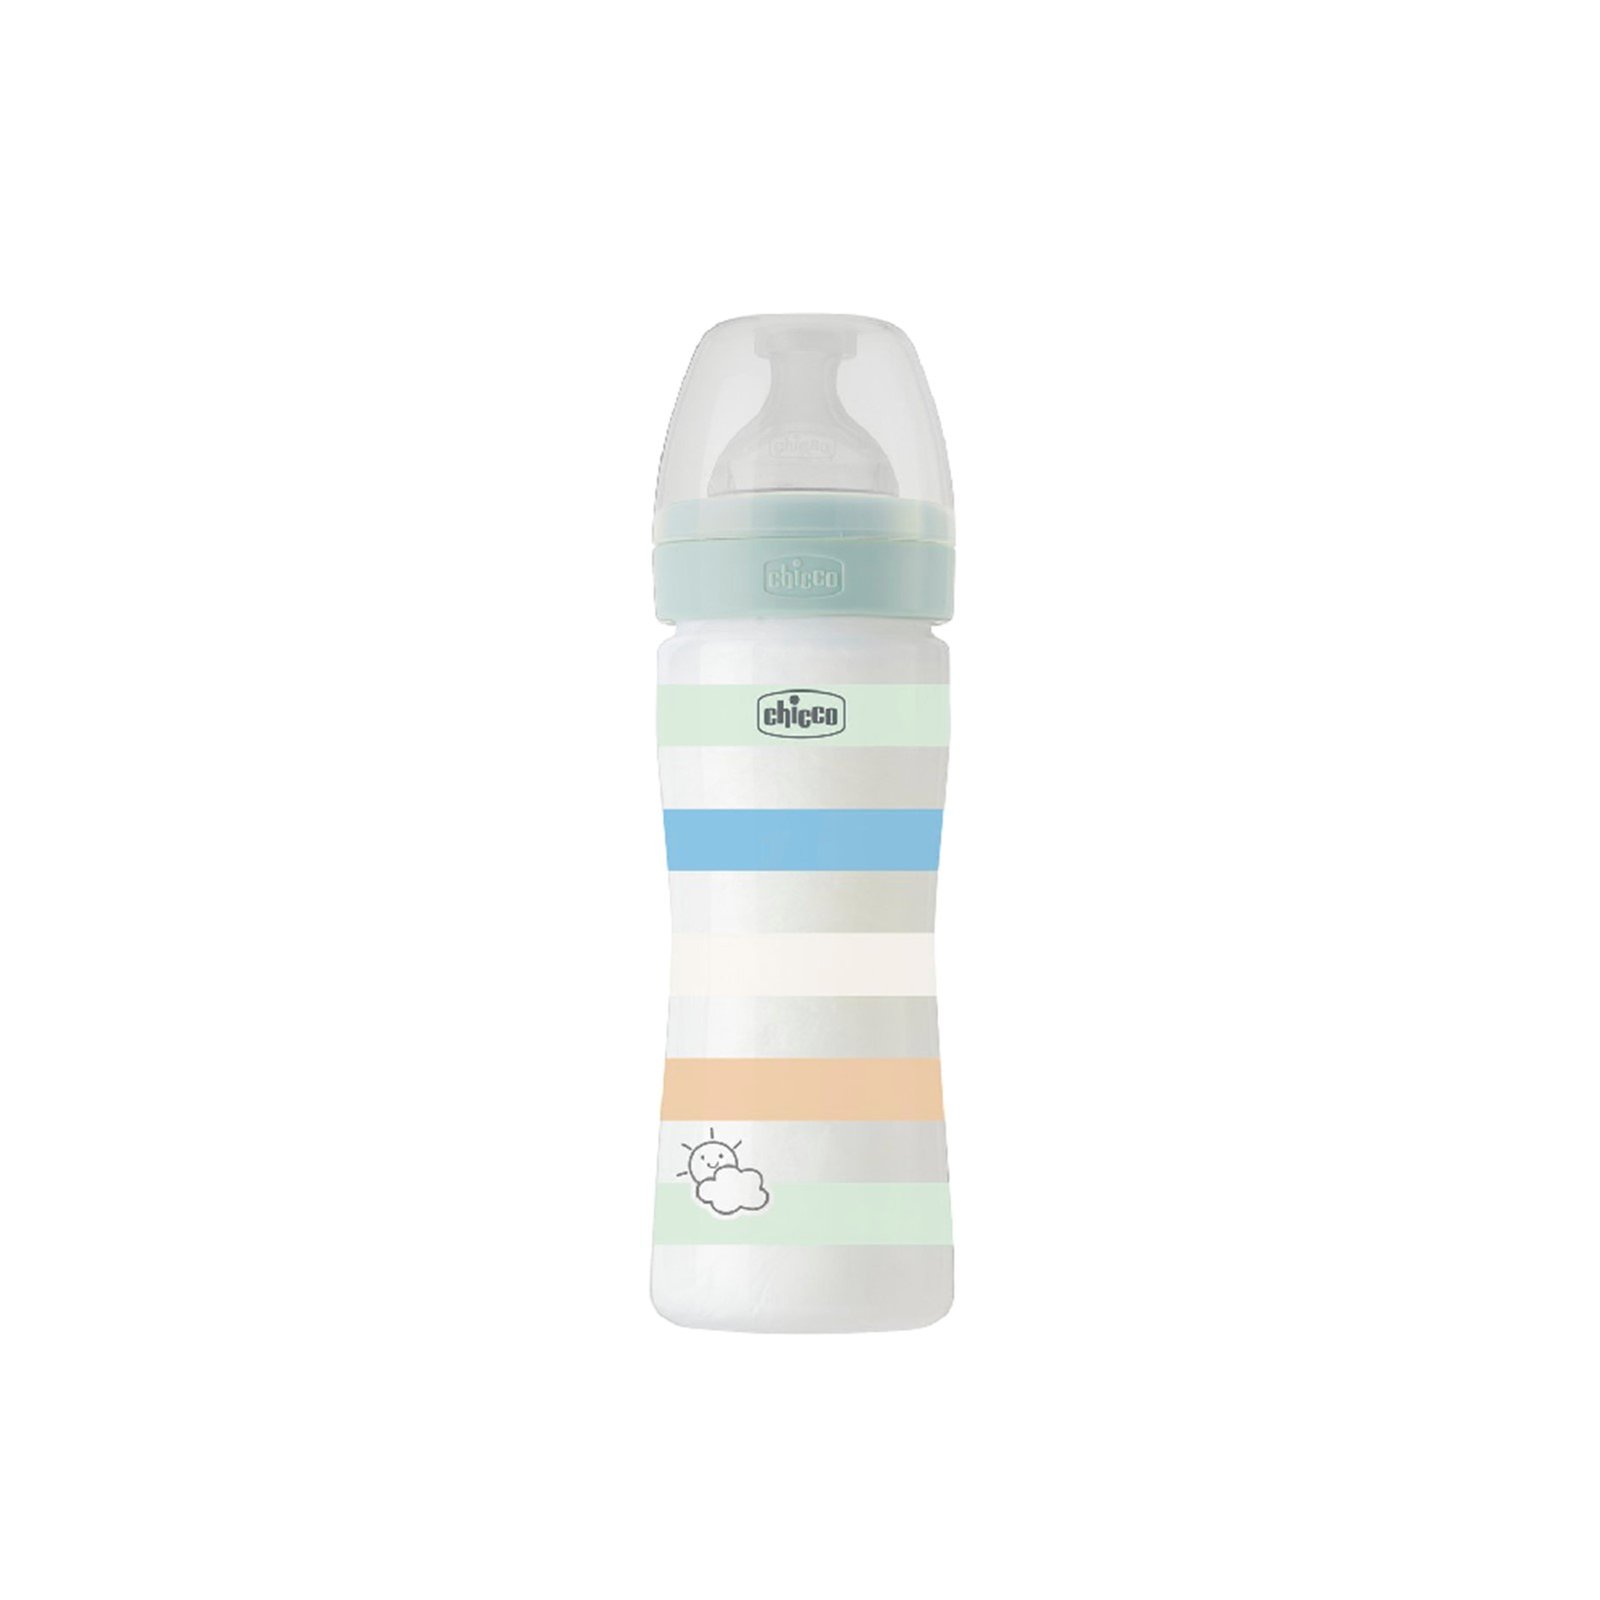 Chicco Well-Being Colors Bottle 2m+ Green 250ml (9 fl oz)